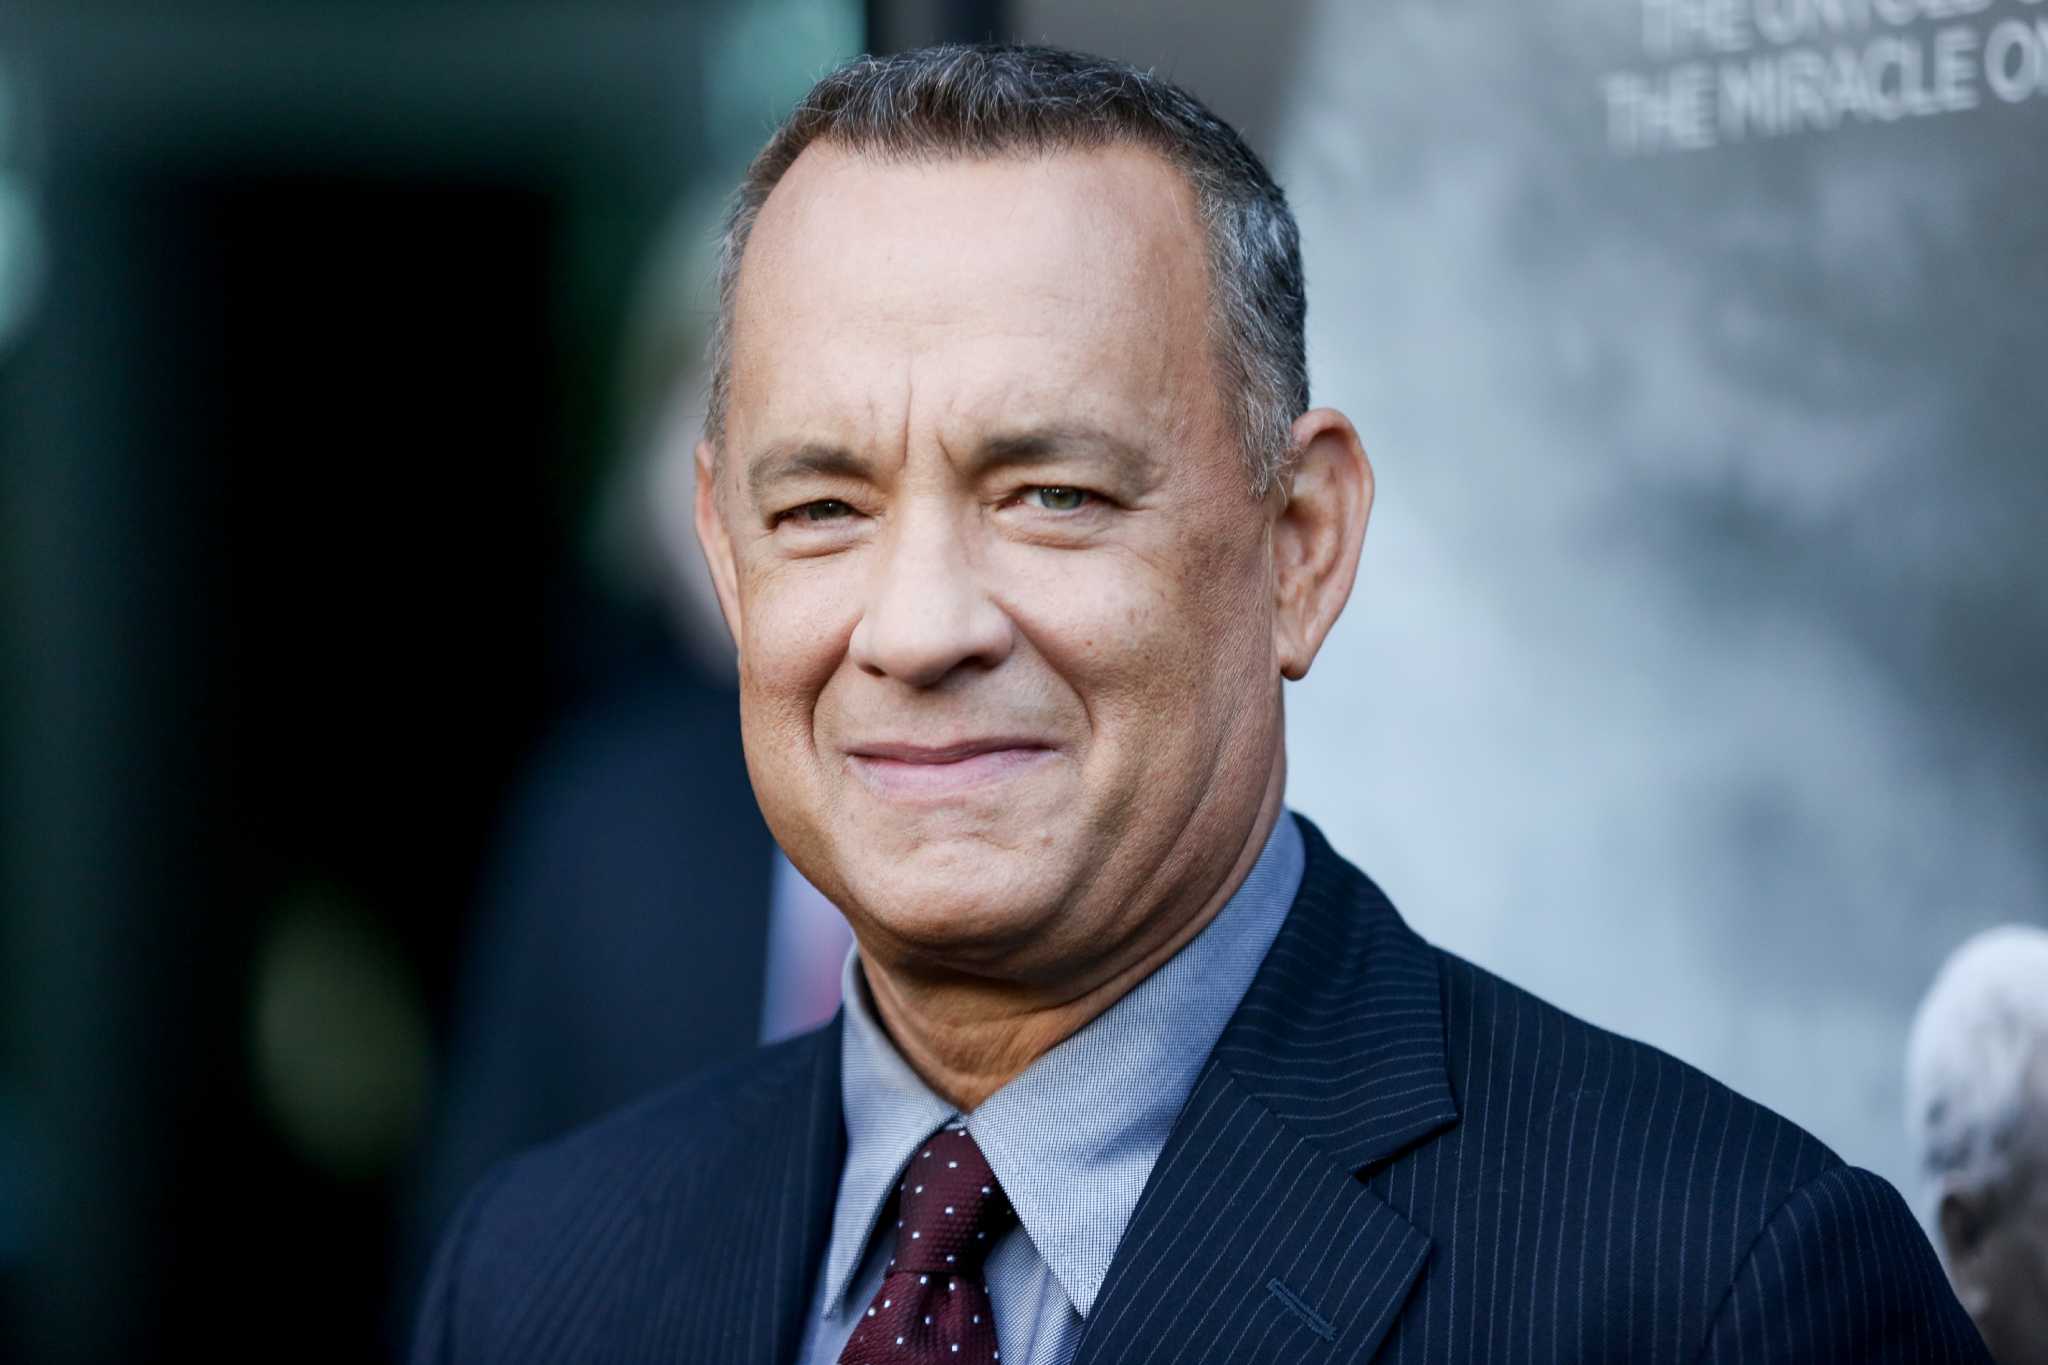 Tom Hanks Crashes Wedding Photos Takes Selfie With Bride And Groom